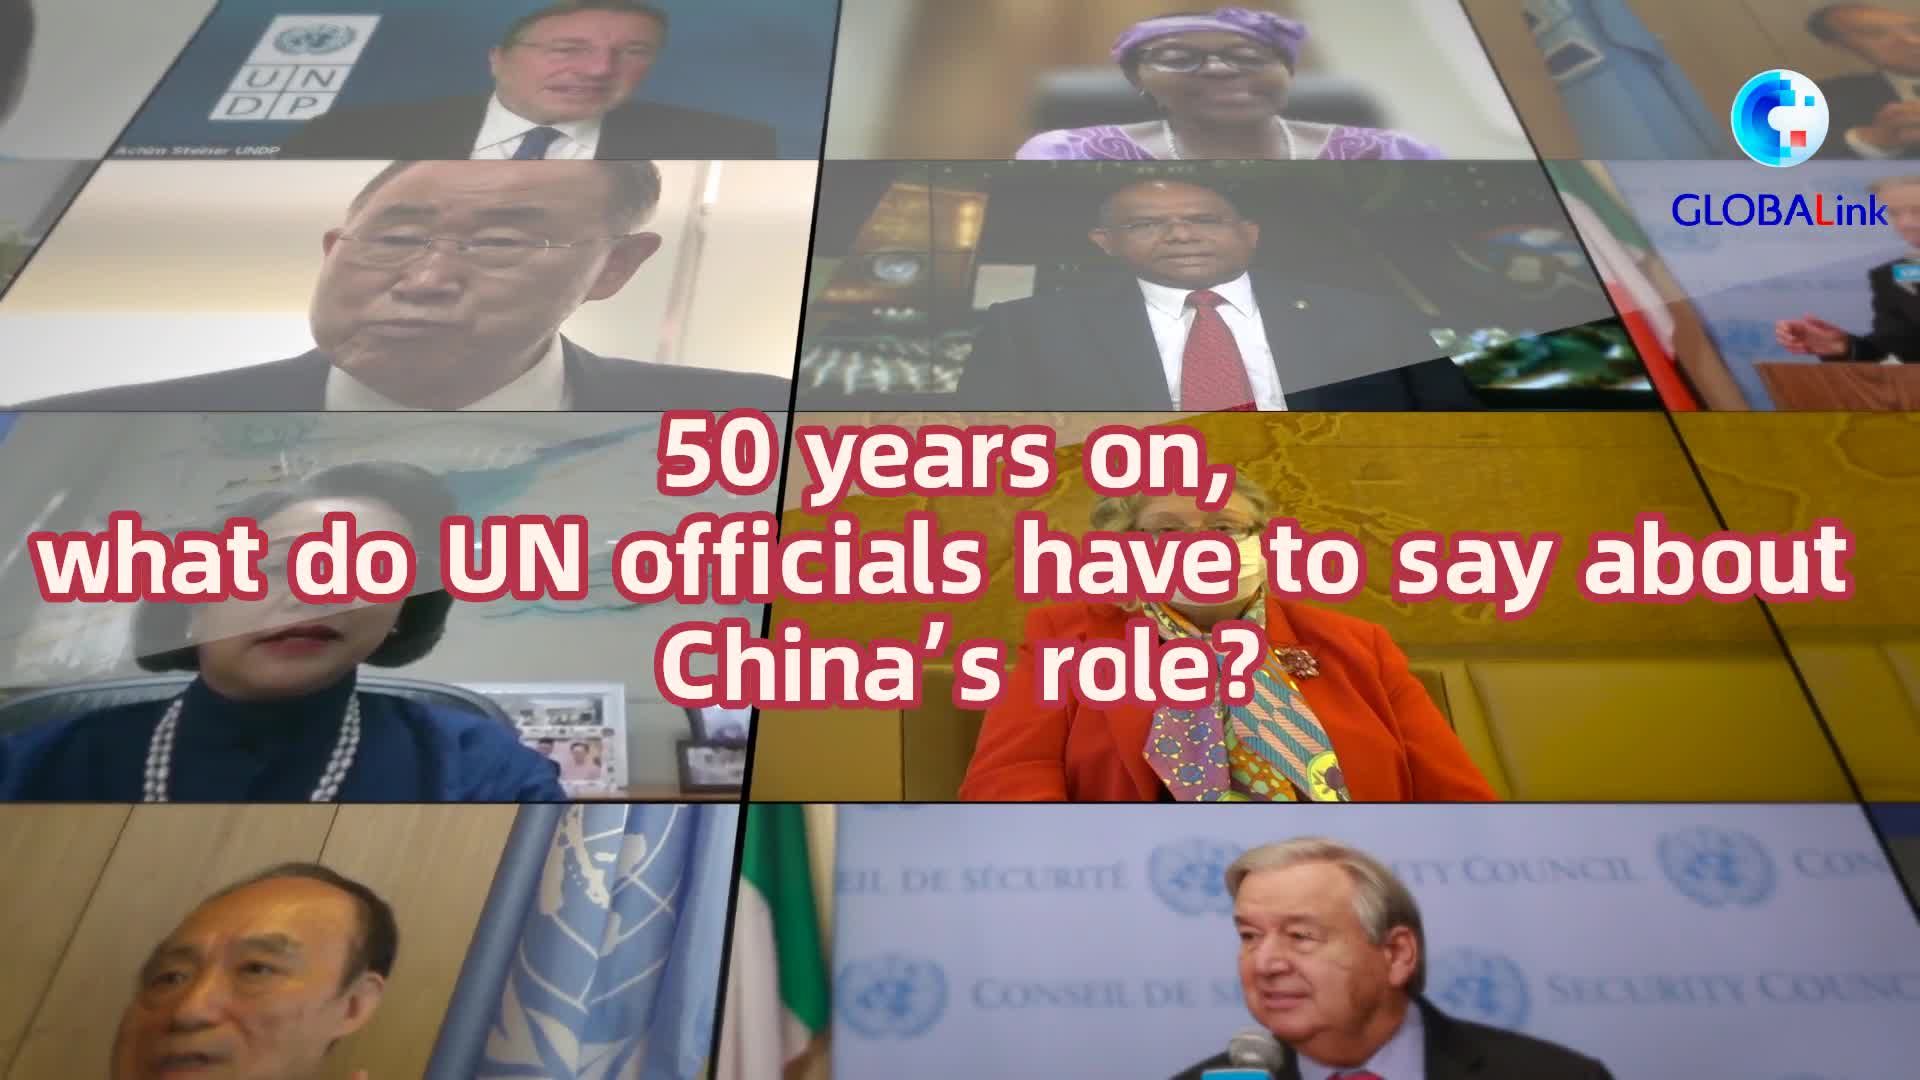 GLOBALink | 50 years on, what do UN officials have to say about China's role?